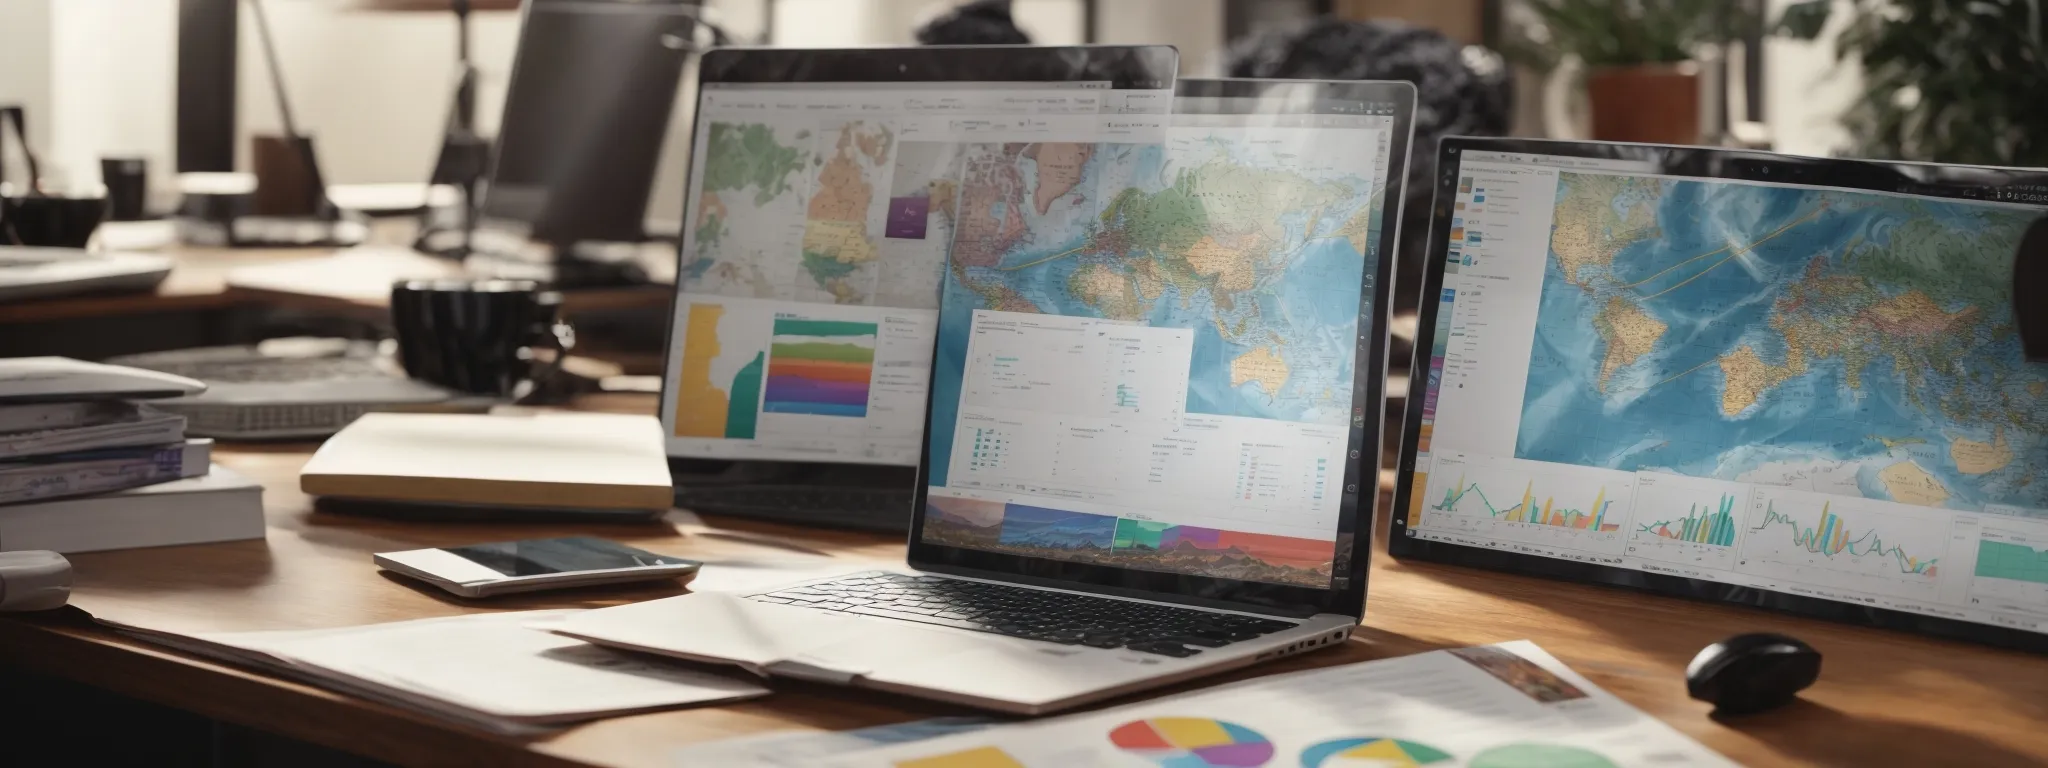 a laptop displaying colorful graphs and maps illustrating regional market trends on a desk surrounded by marketing strategy notes.